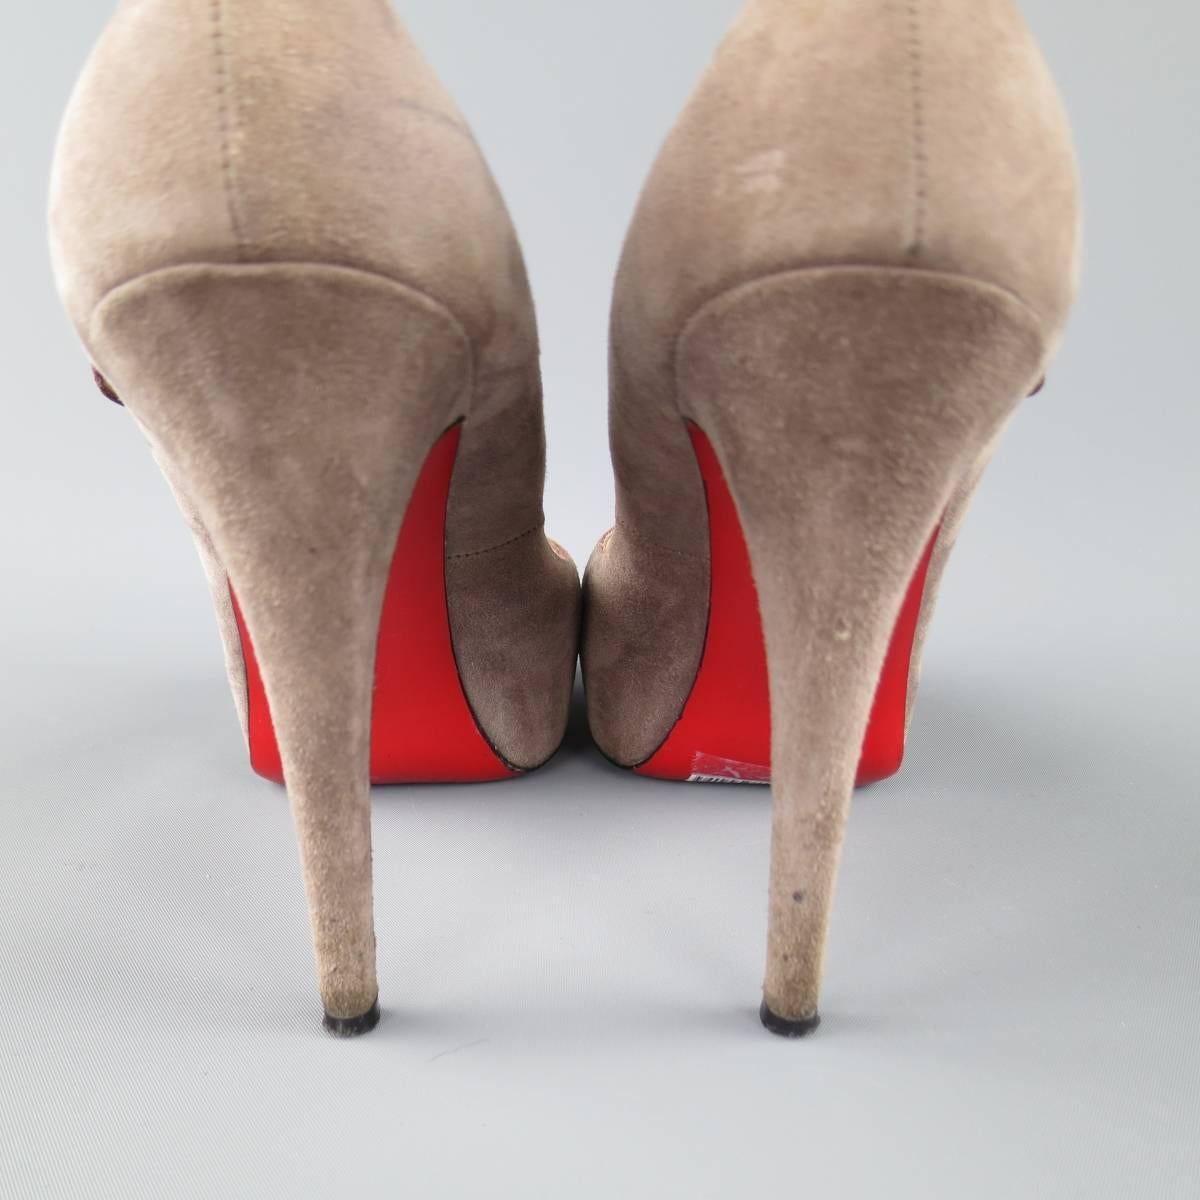 CHRISTIAN LOUBOUTIN Size 10 Taupe Gray Suede Platform Mary Jane Pumps 3